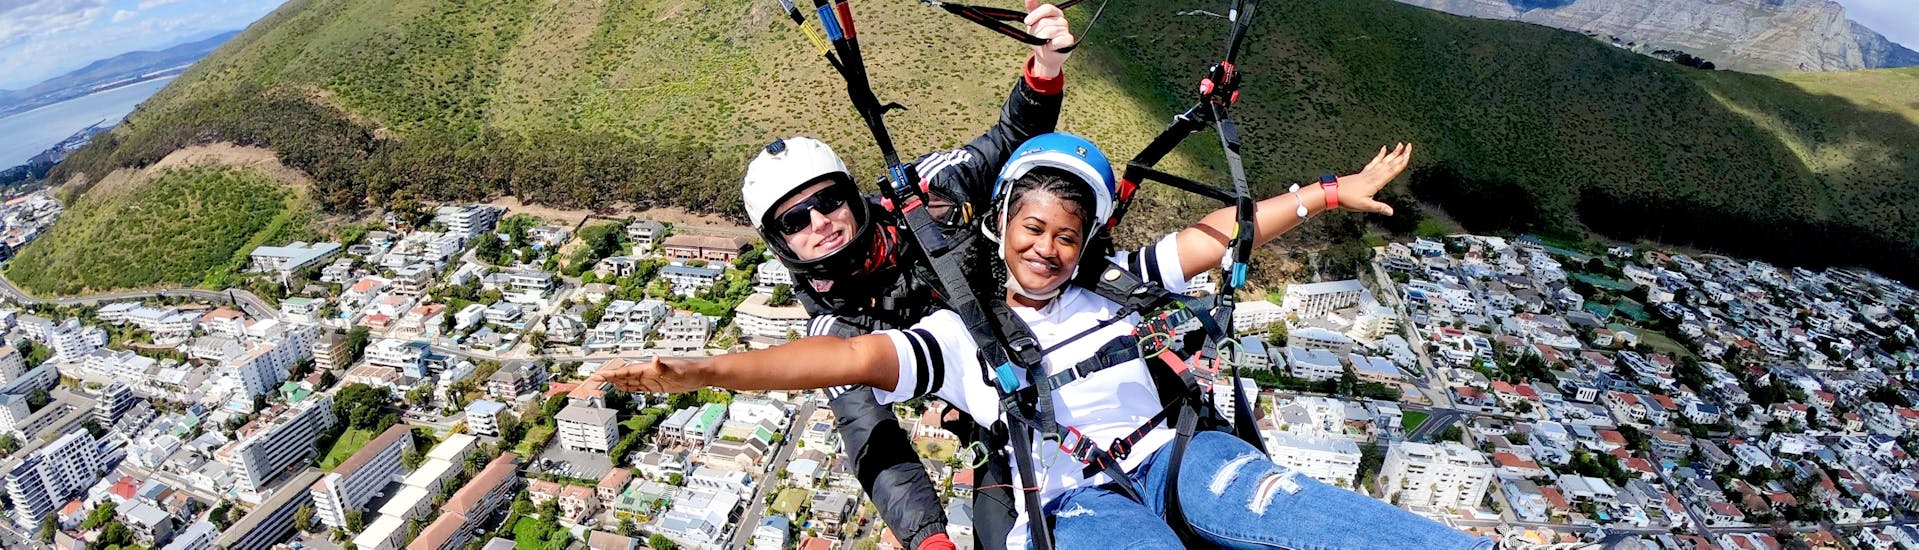 A woman enjoys her Paragliding in Cape Town from Signal Hill or Lion's Head with Hi5 Tandem Paragliding Cape Town